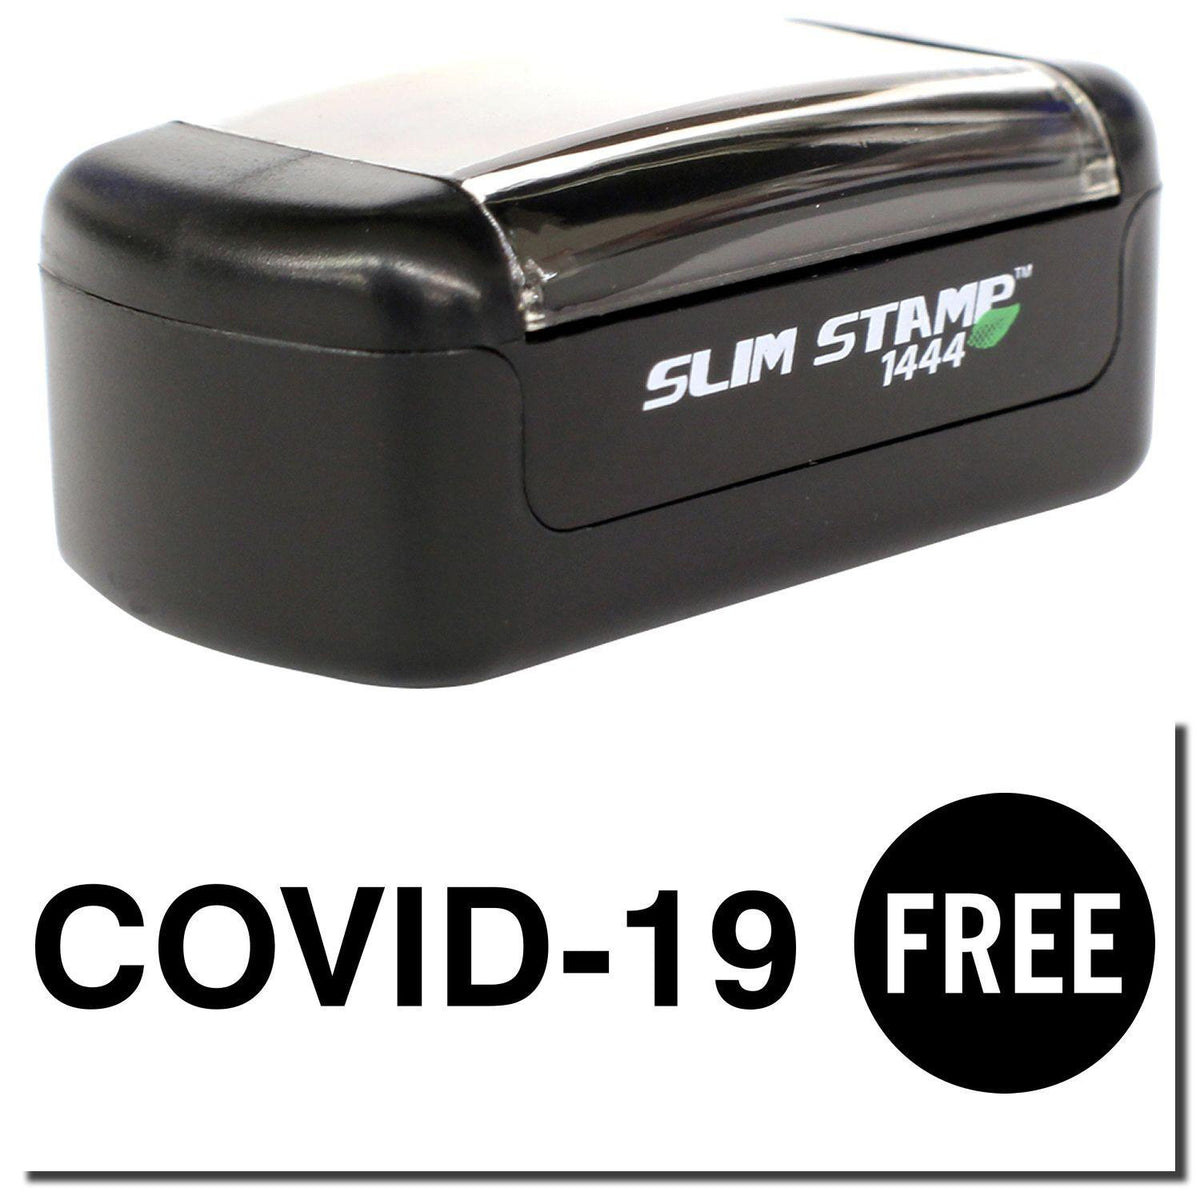 A stock office pre-inked stamp with a stamped image showing how the text &quot;COVID-19 FREE&quot; is displayed after stamping.